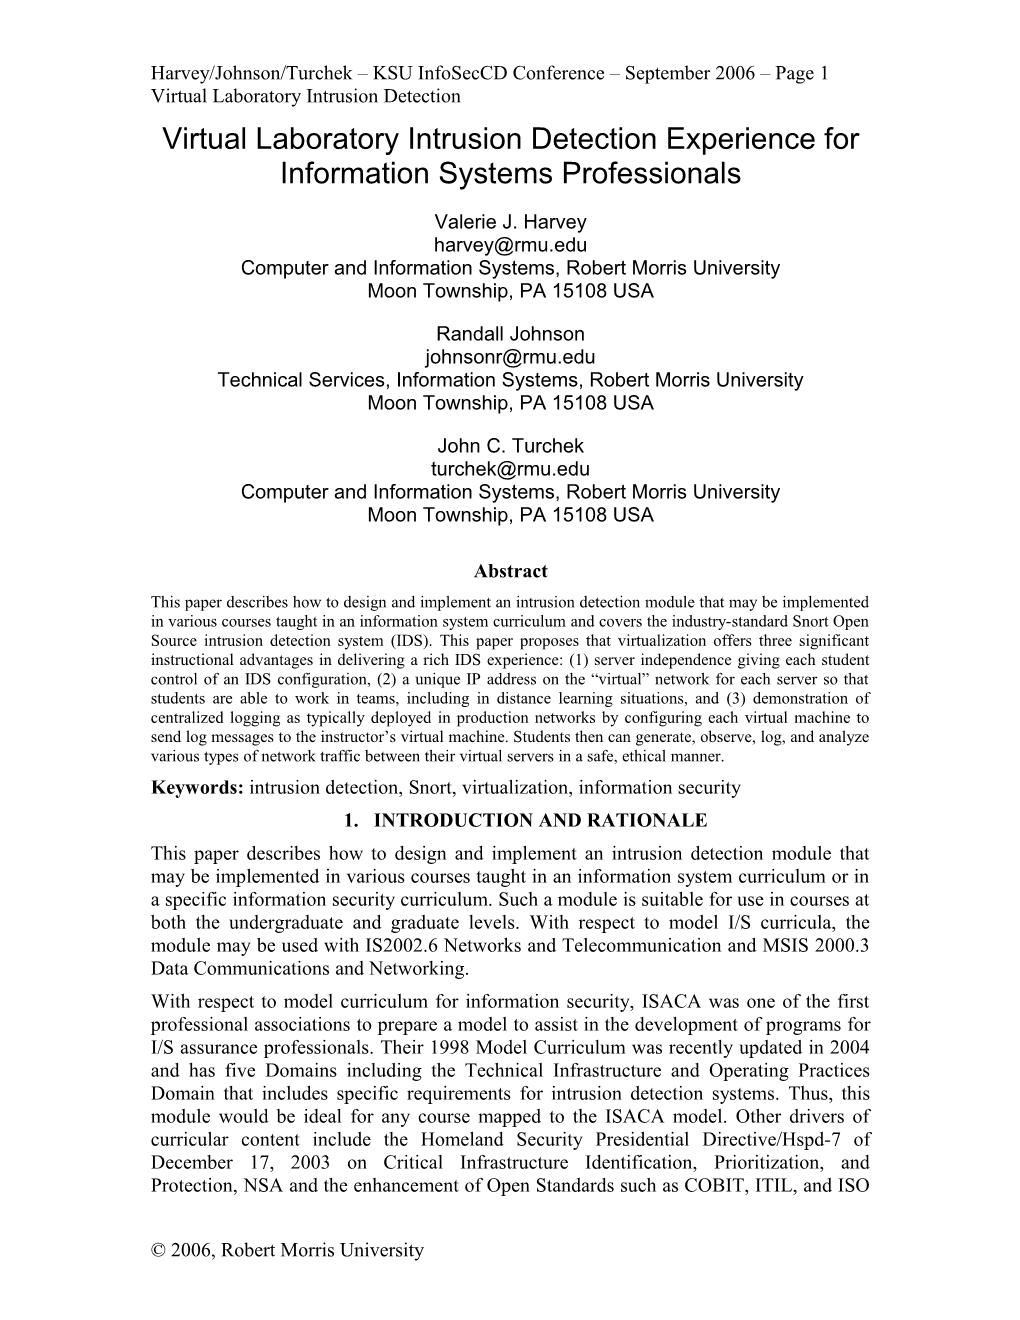 Coordinated Topic Presentations for Information Systems Core Curriculum and Discrete Mathematics